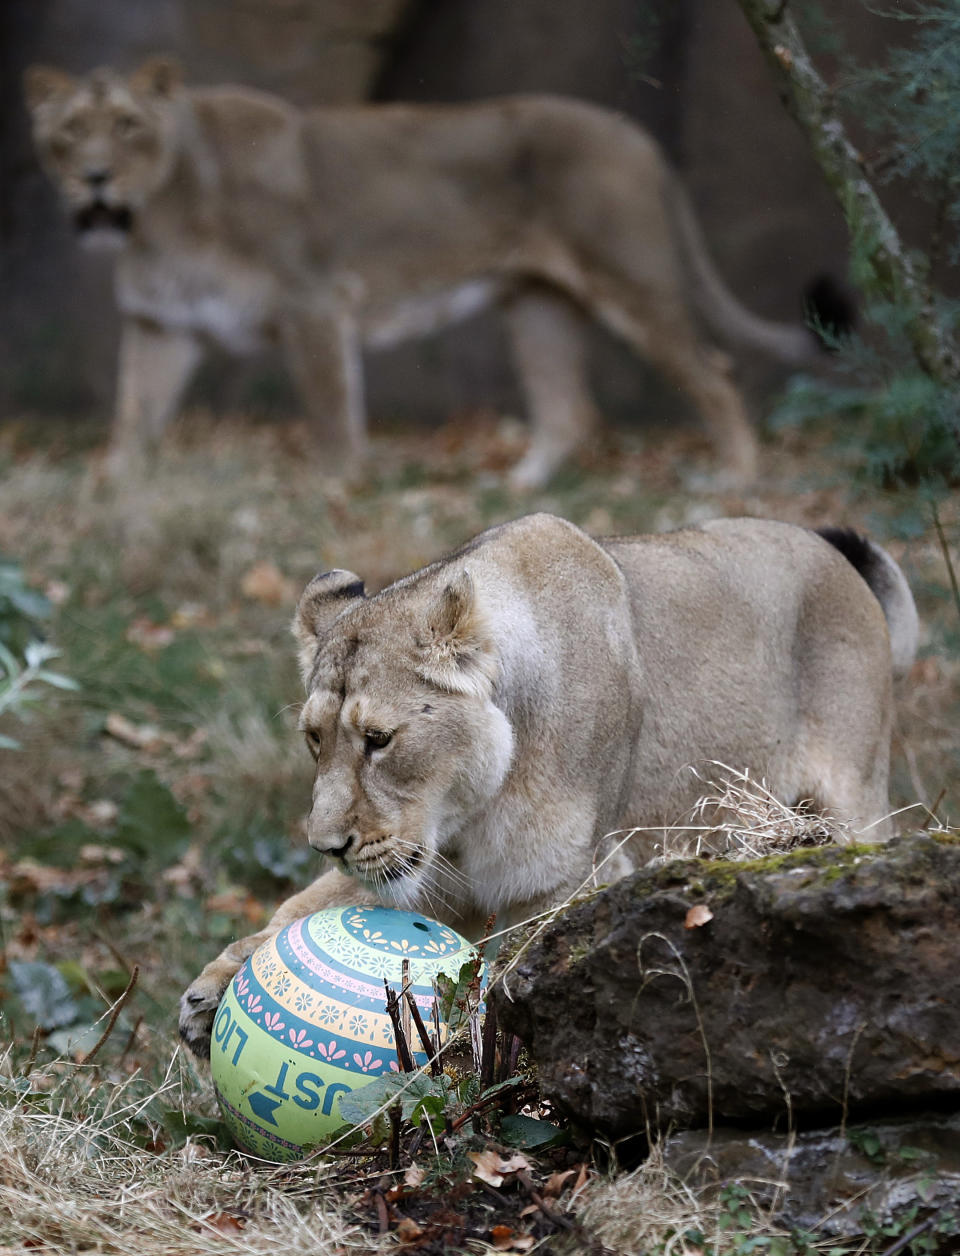 One of London Zoo's Asiatic lionesses, sisters Heidi, Indi or Rubi plays with a ball, a day ahead of World Lion Day in London, Thursday, Aug. 9, 2018. The pride will be celebrating conservation success as Asiatic lions numbers continue to increase. (AP Photo/Frank Augstein)